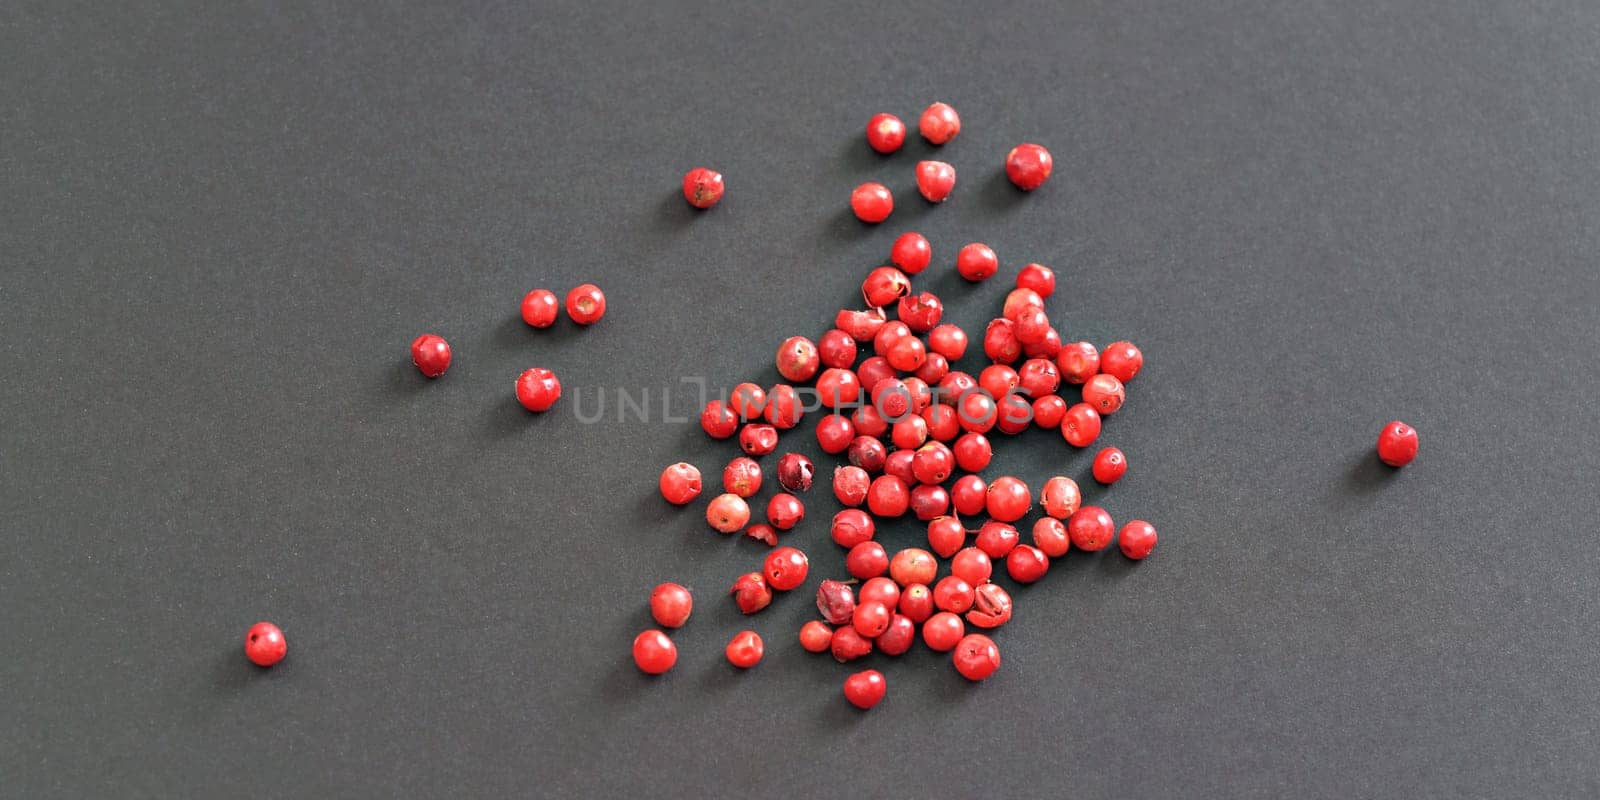 Whole pink / red peppercorns on black / gray paper, view from above by Ivanko